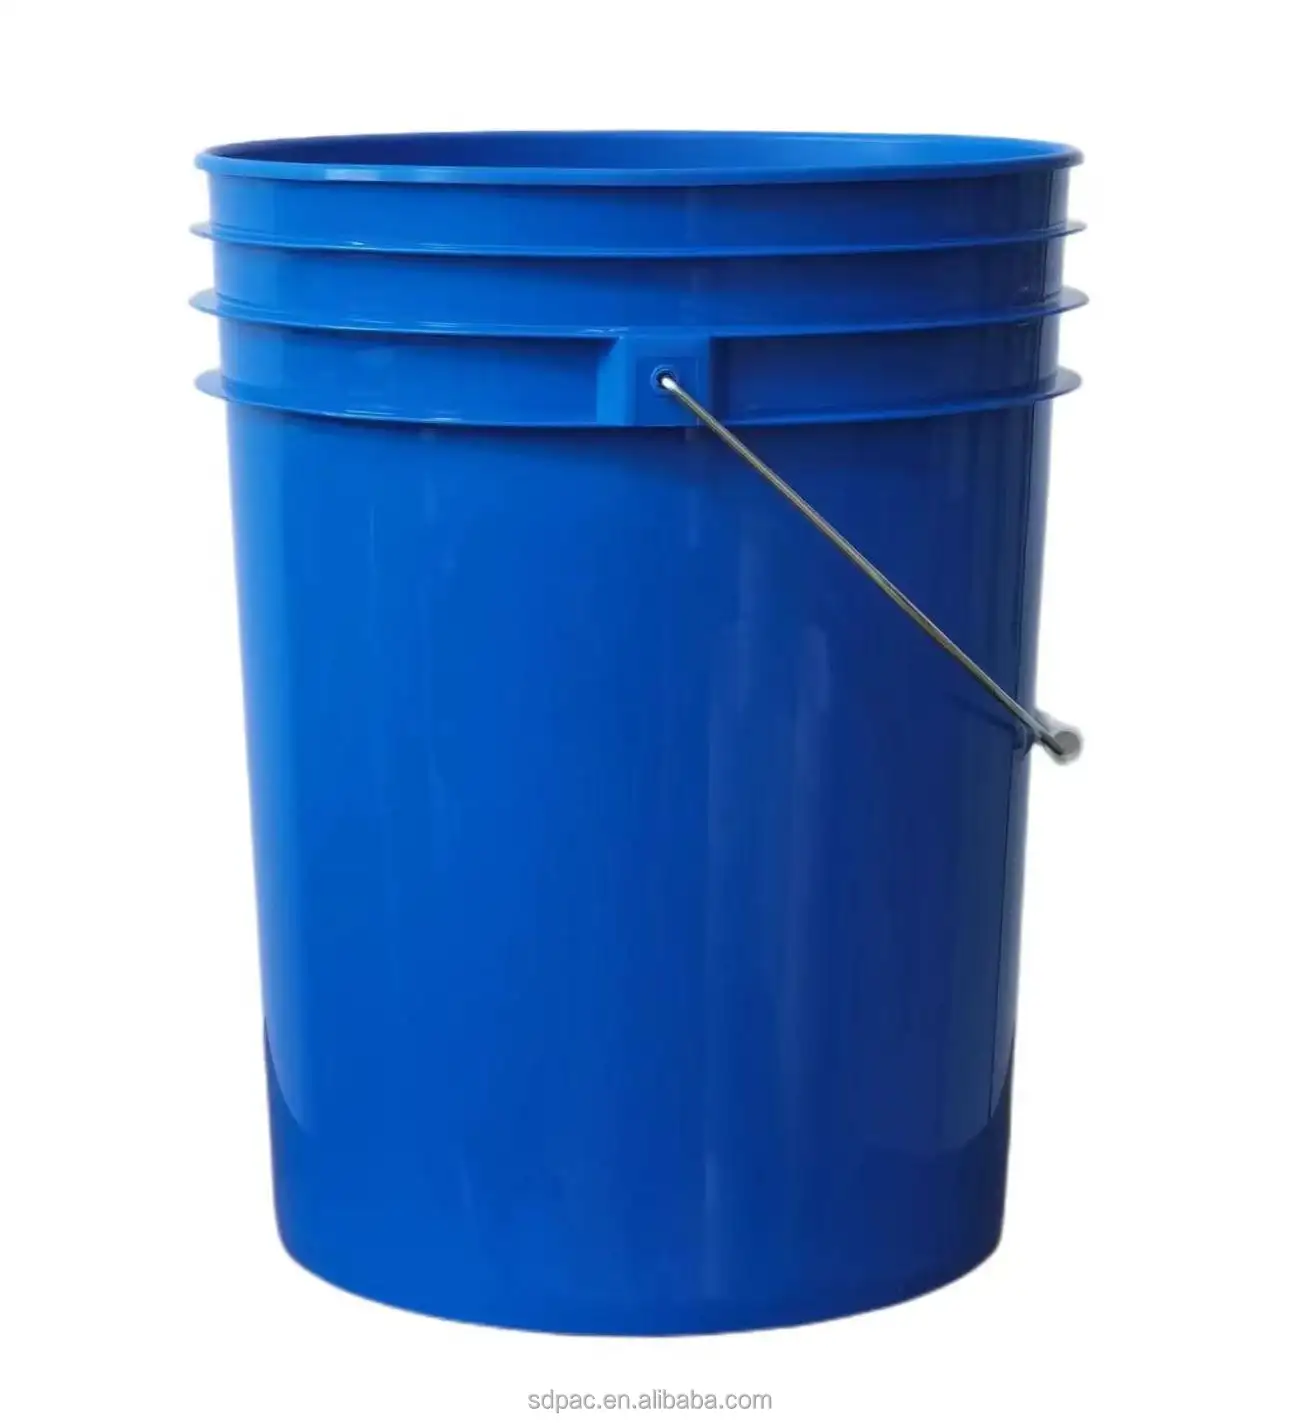 BPA-Free Plastic 5 Gallon Bucket 19L Exterior And Interior Paint Pail Made in China Sdpac